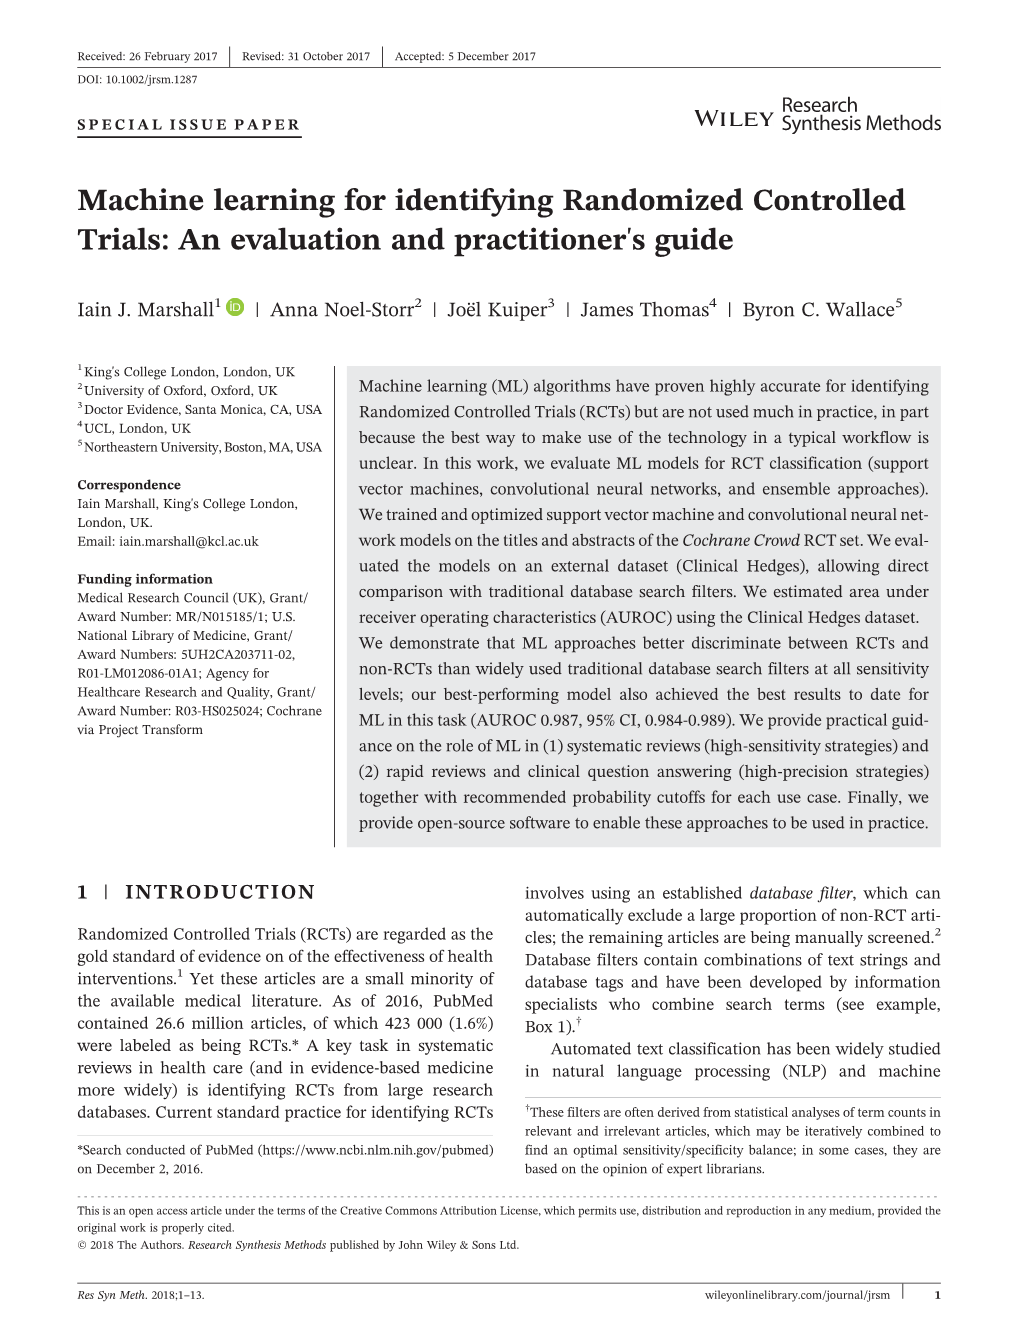 Machine Learning for Identifying Randomized Controlled Trials: an Evaluation and Practitioner's Guide